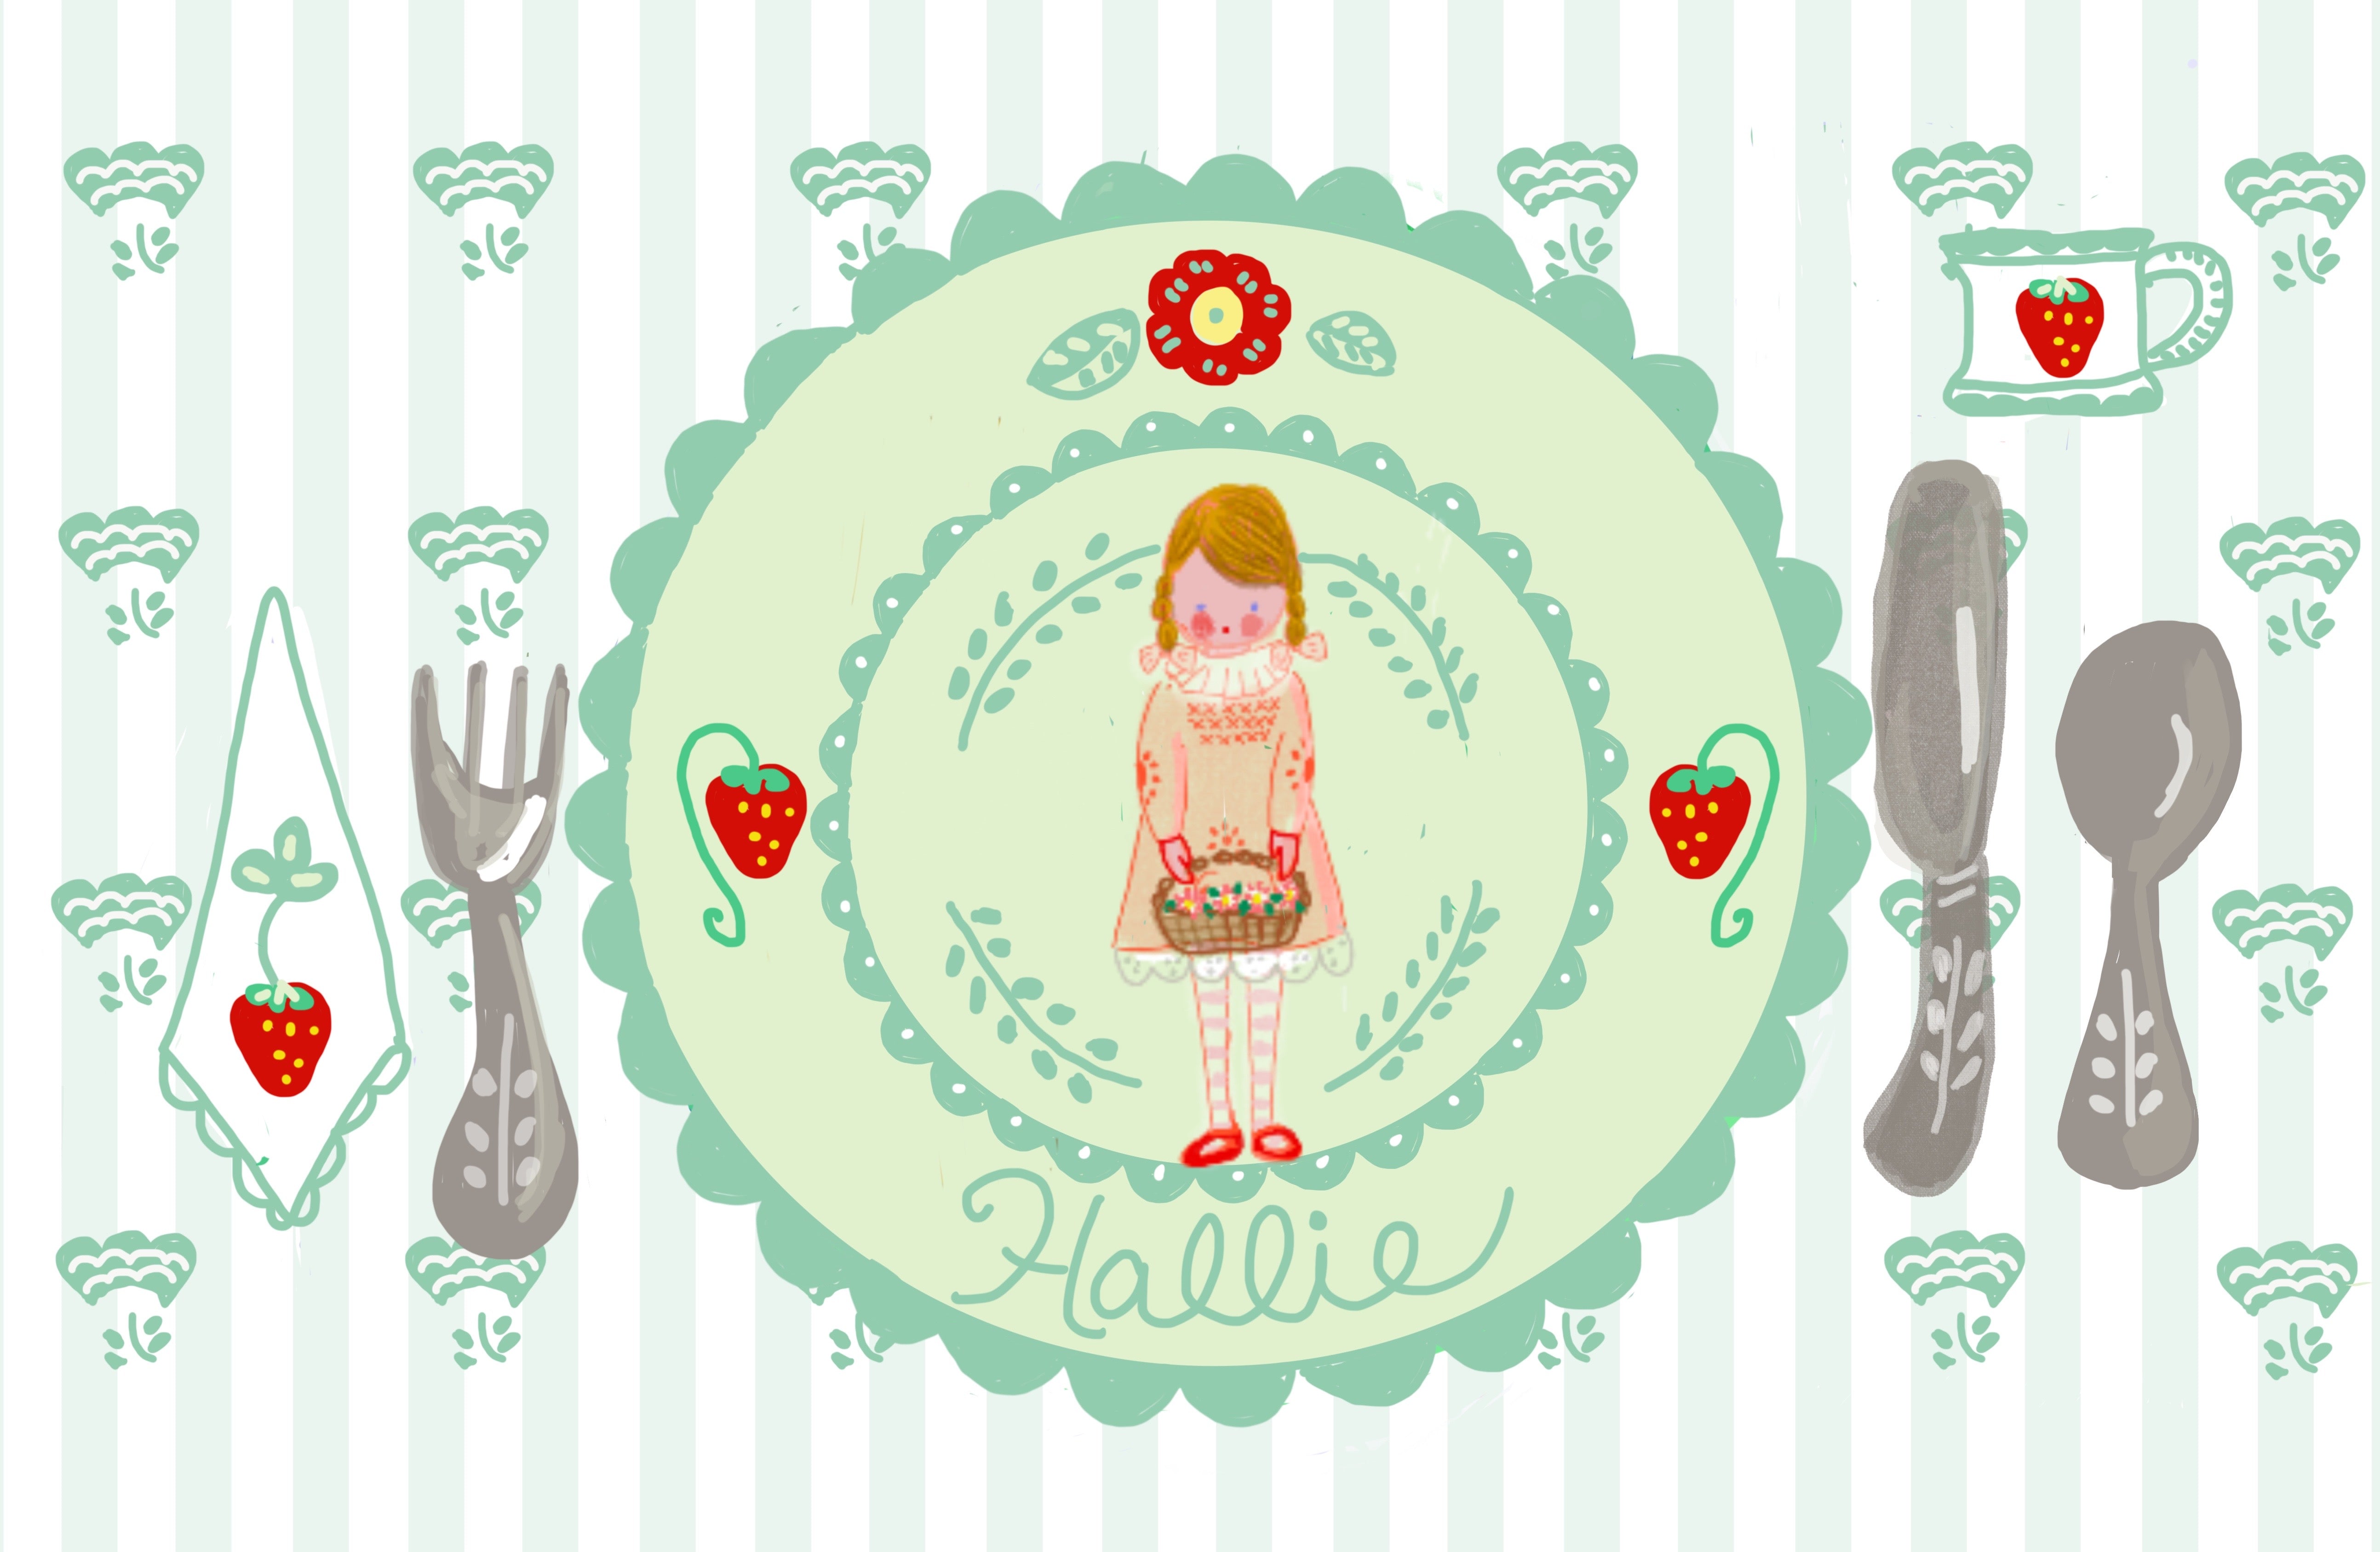 Girl with Flower Basket Placemat (personalized) - Premium Placemat from Tricia Lowenfield Design 